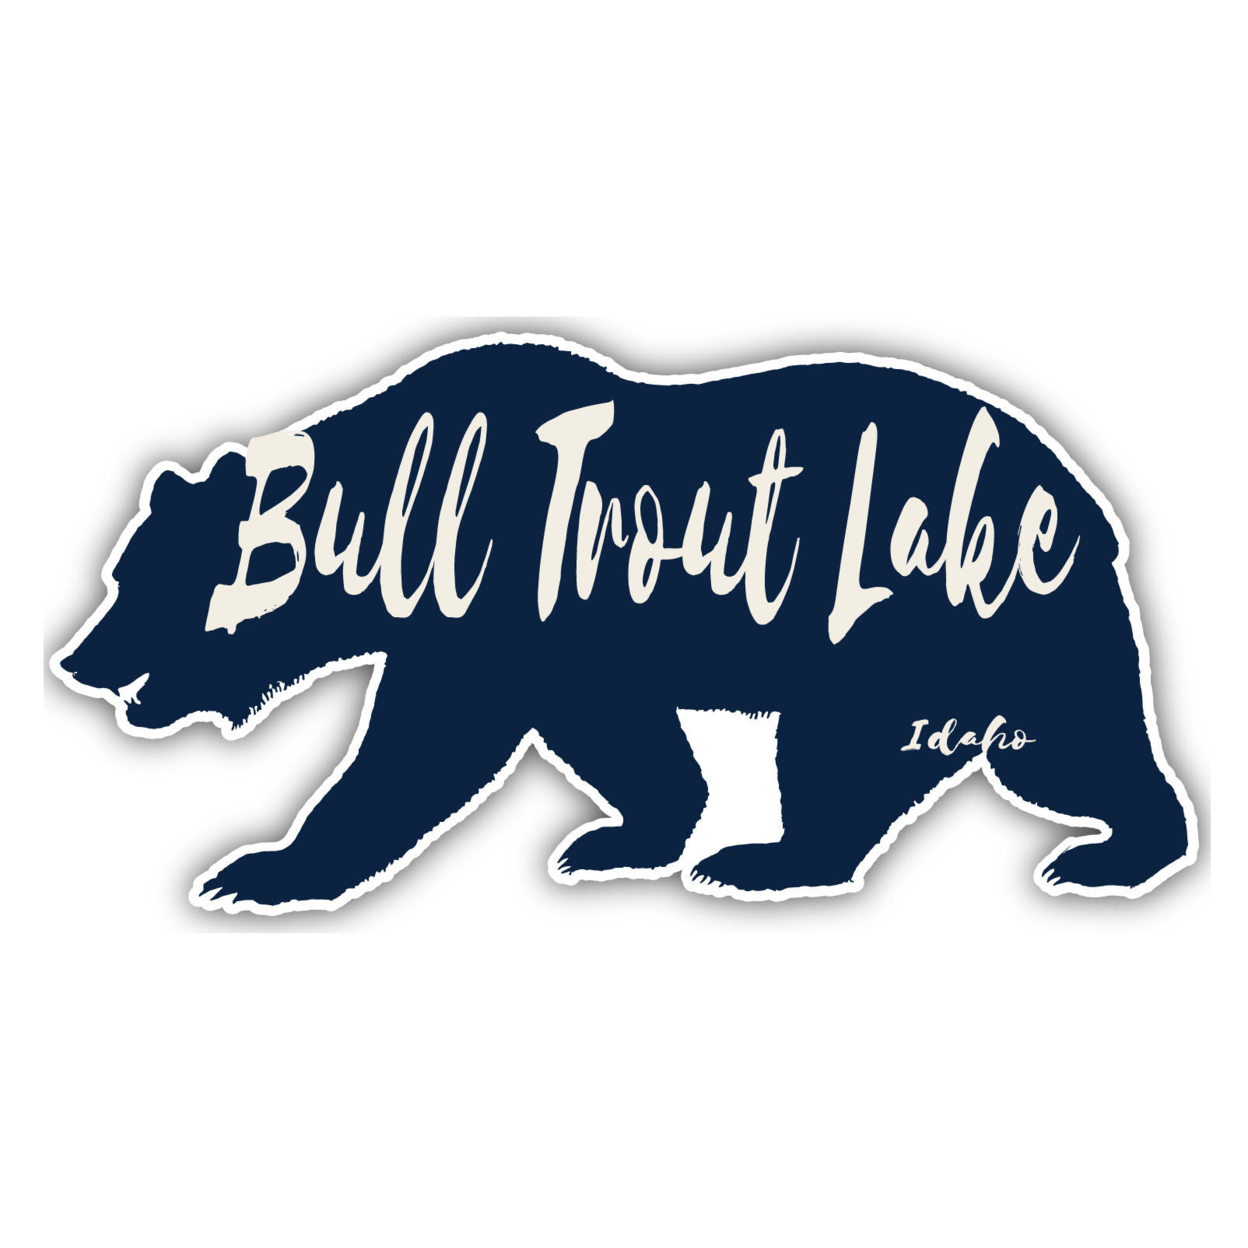 Bull Trout Lake Idaho Souvenir Decorative Stickers (Choose Theme And Size) - 4-Pack, 6-Inch, Bear